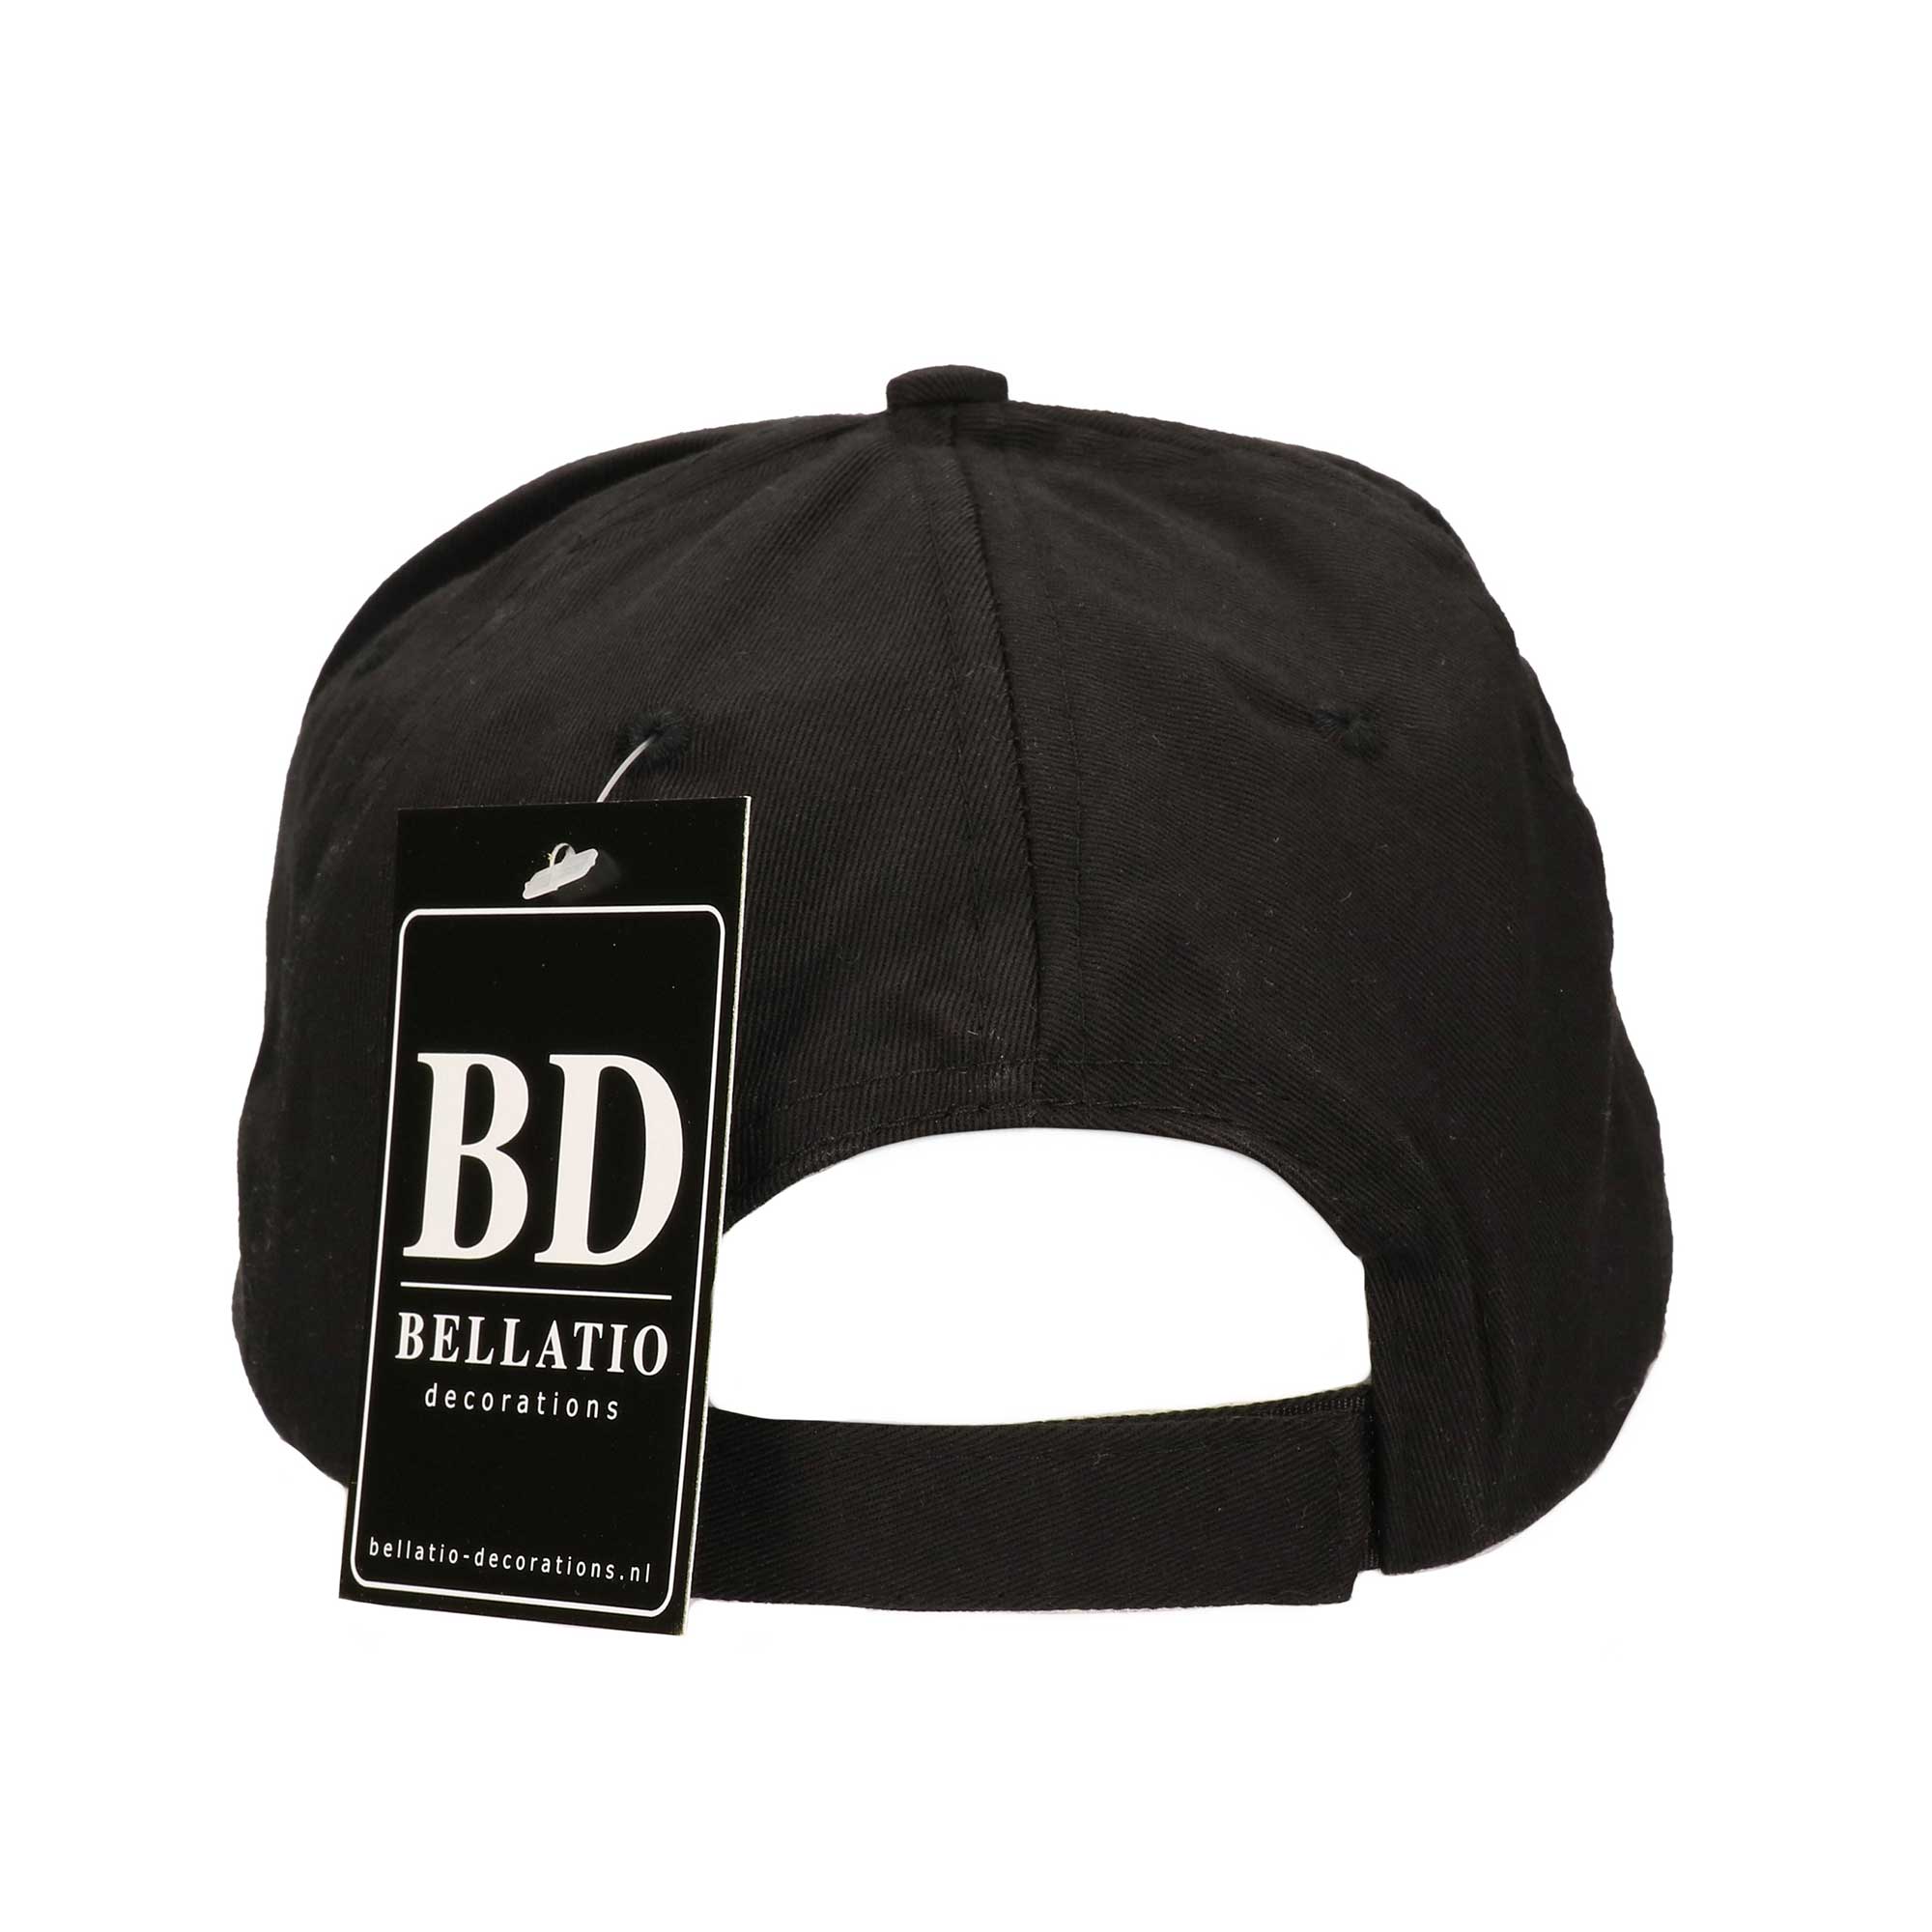 Carnaval cap race driver black for adults